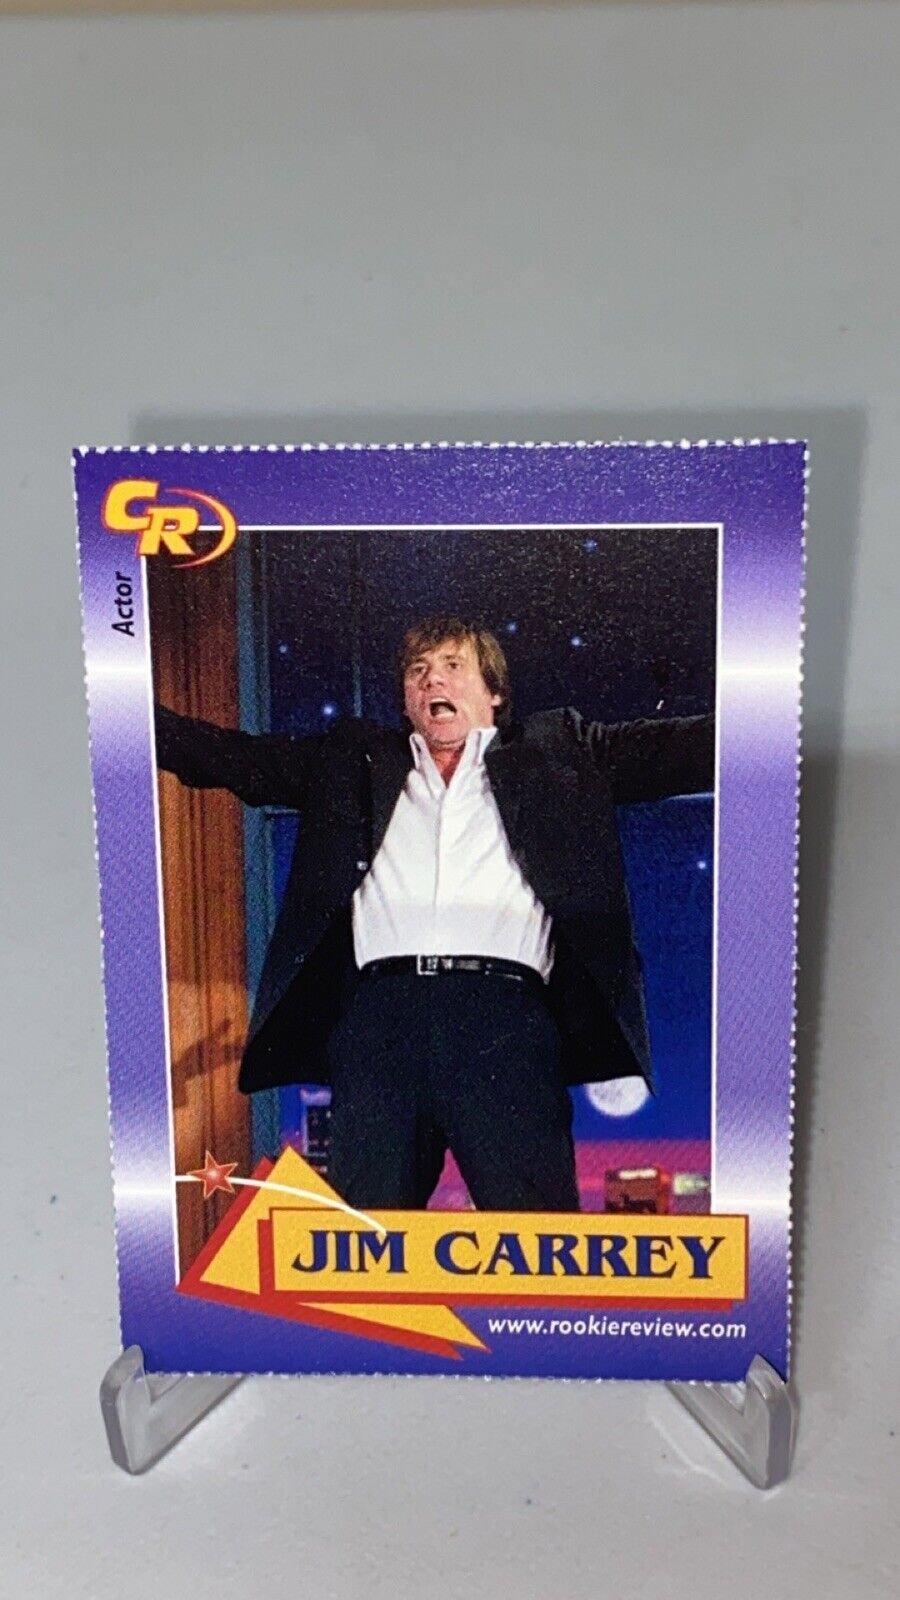 2003 Celebrity Review Rookie Review Jim Carrey Actor Comedian Card #7